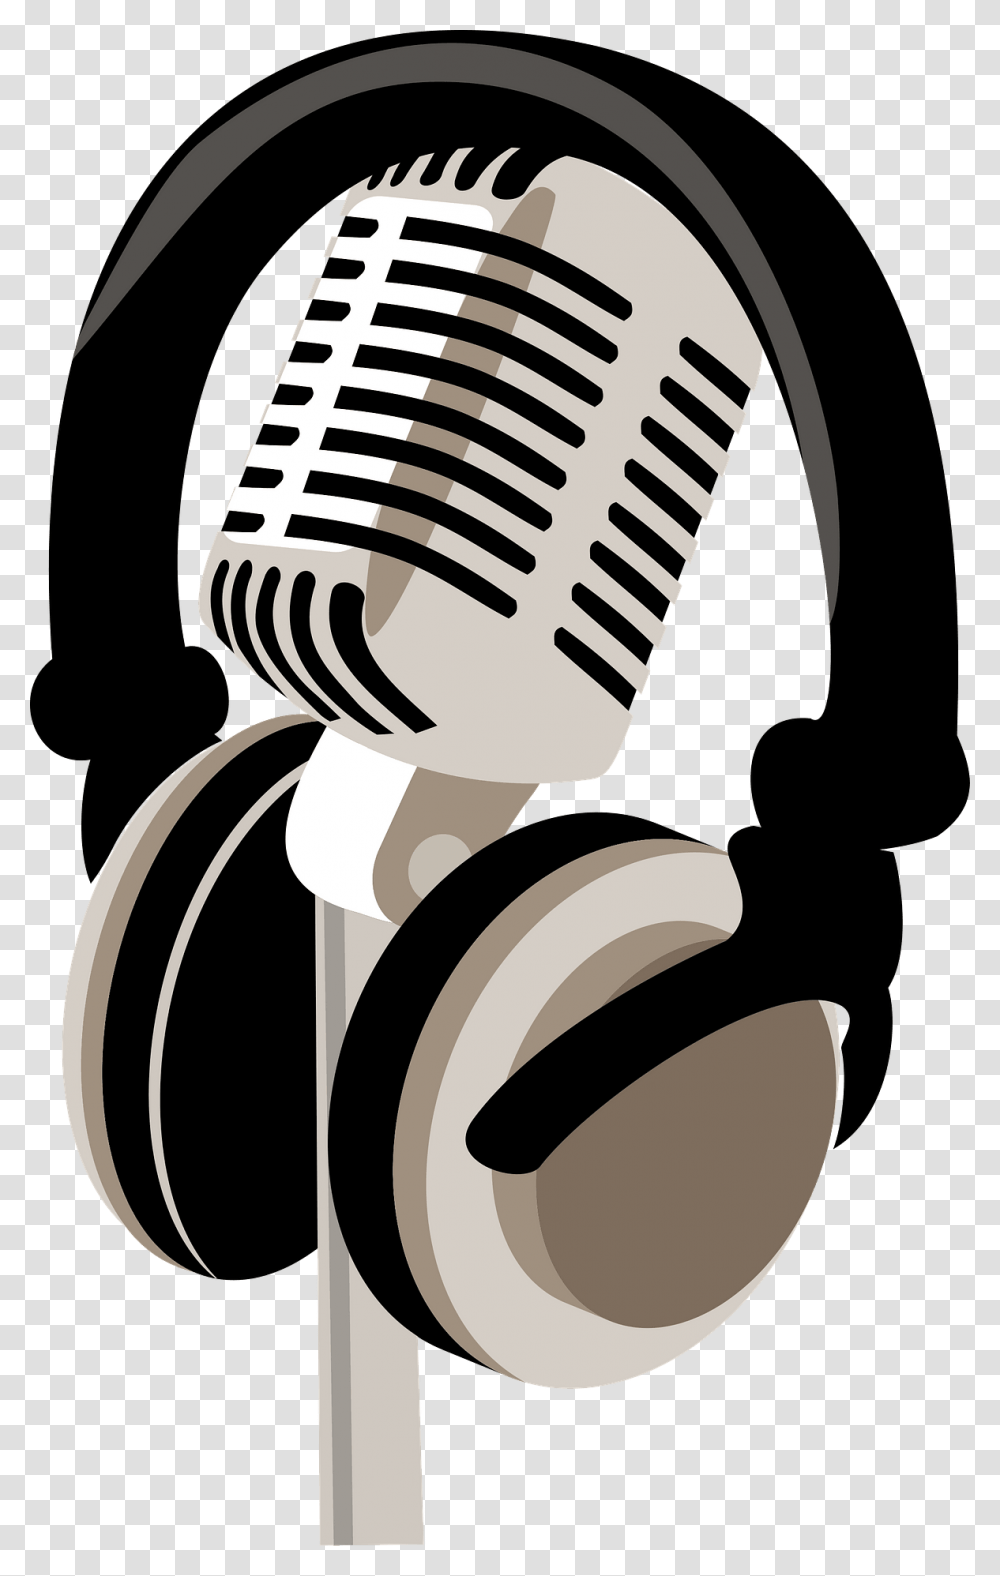 Old Fashioned Microphone And Headphones Clipart Free Microphone And Headphones Transparent Png